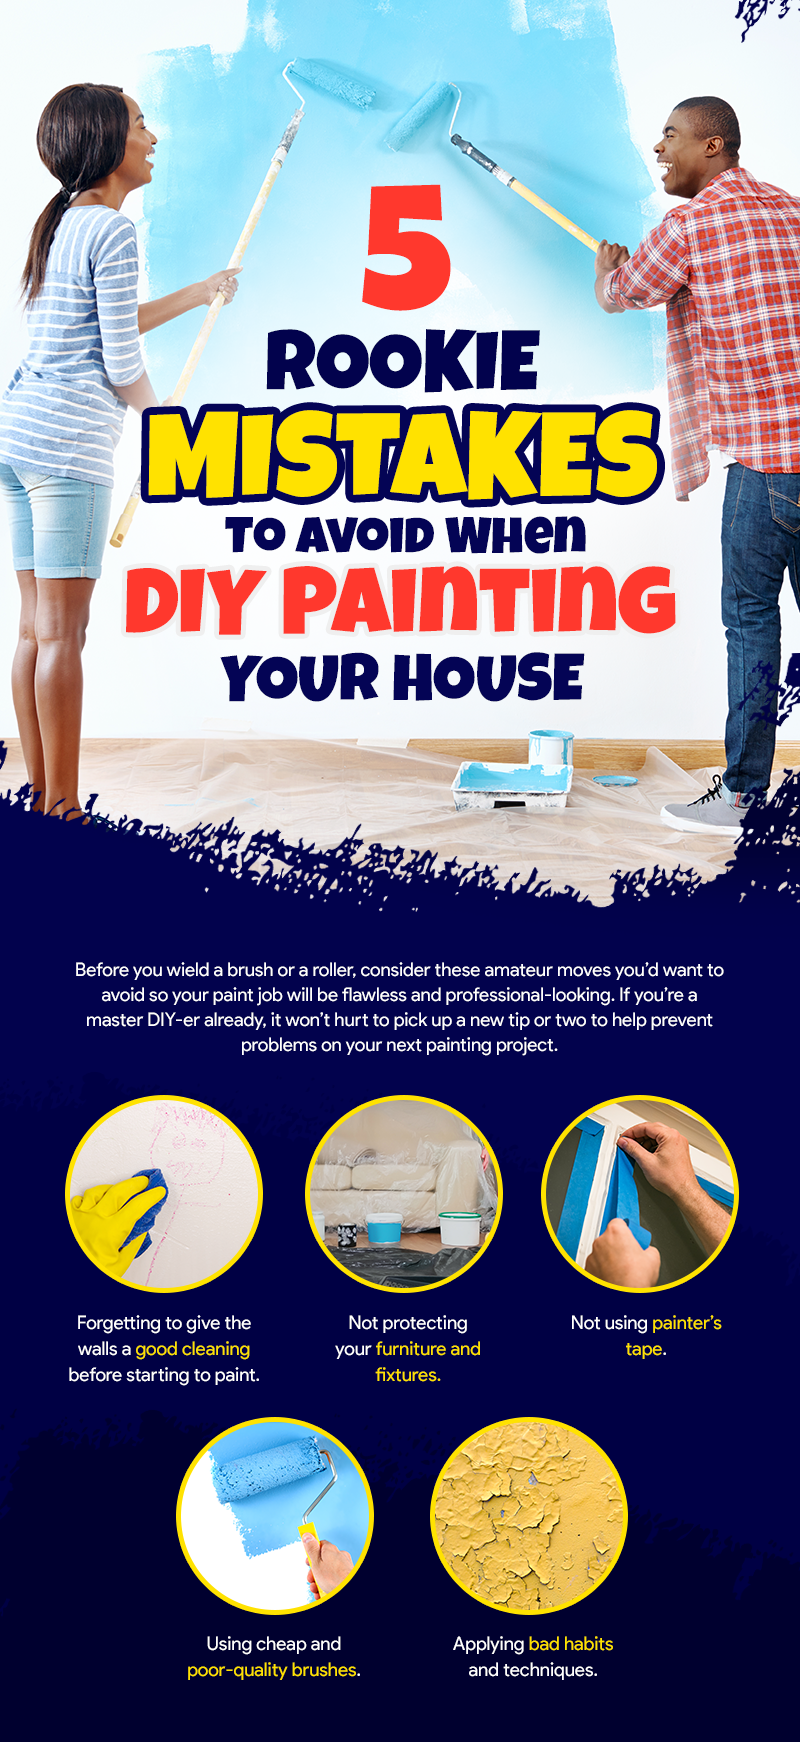 5 Rookie Mistakes To Avoid When DIY Painting Your House